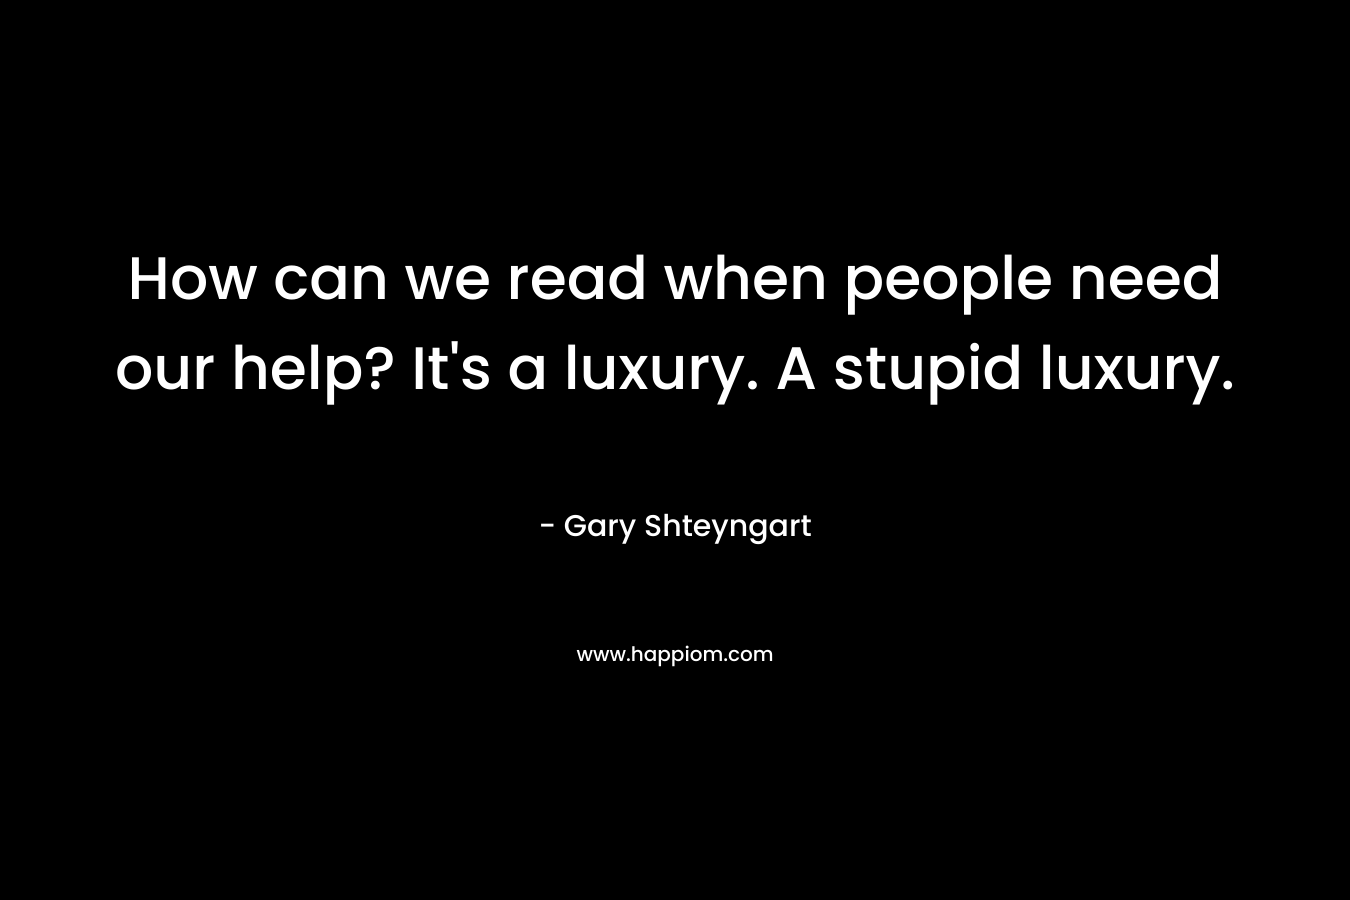 How can we read when people need our help? It's a luxury. A stupid luxury.